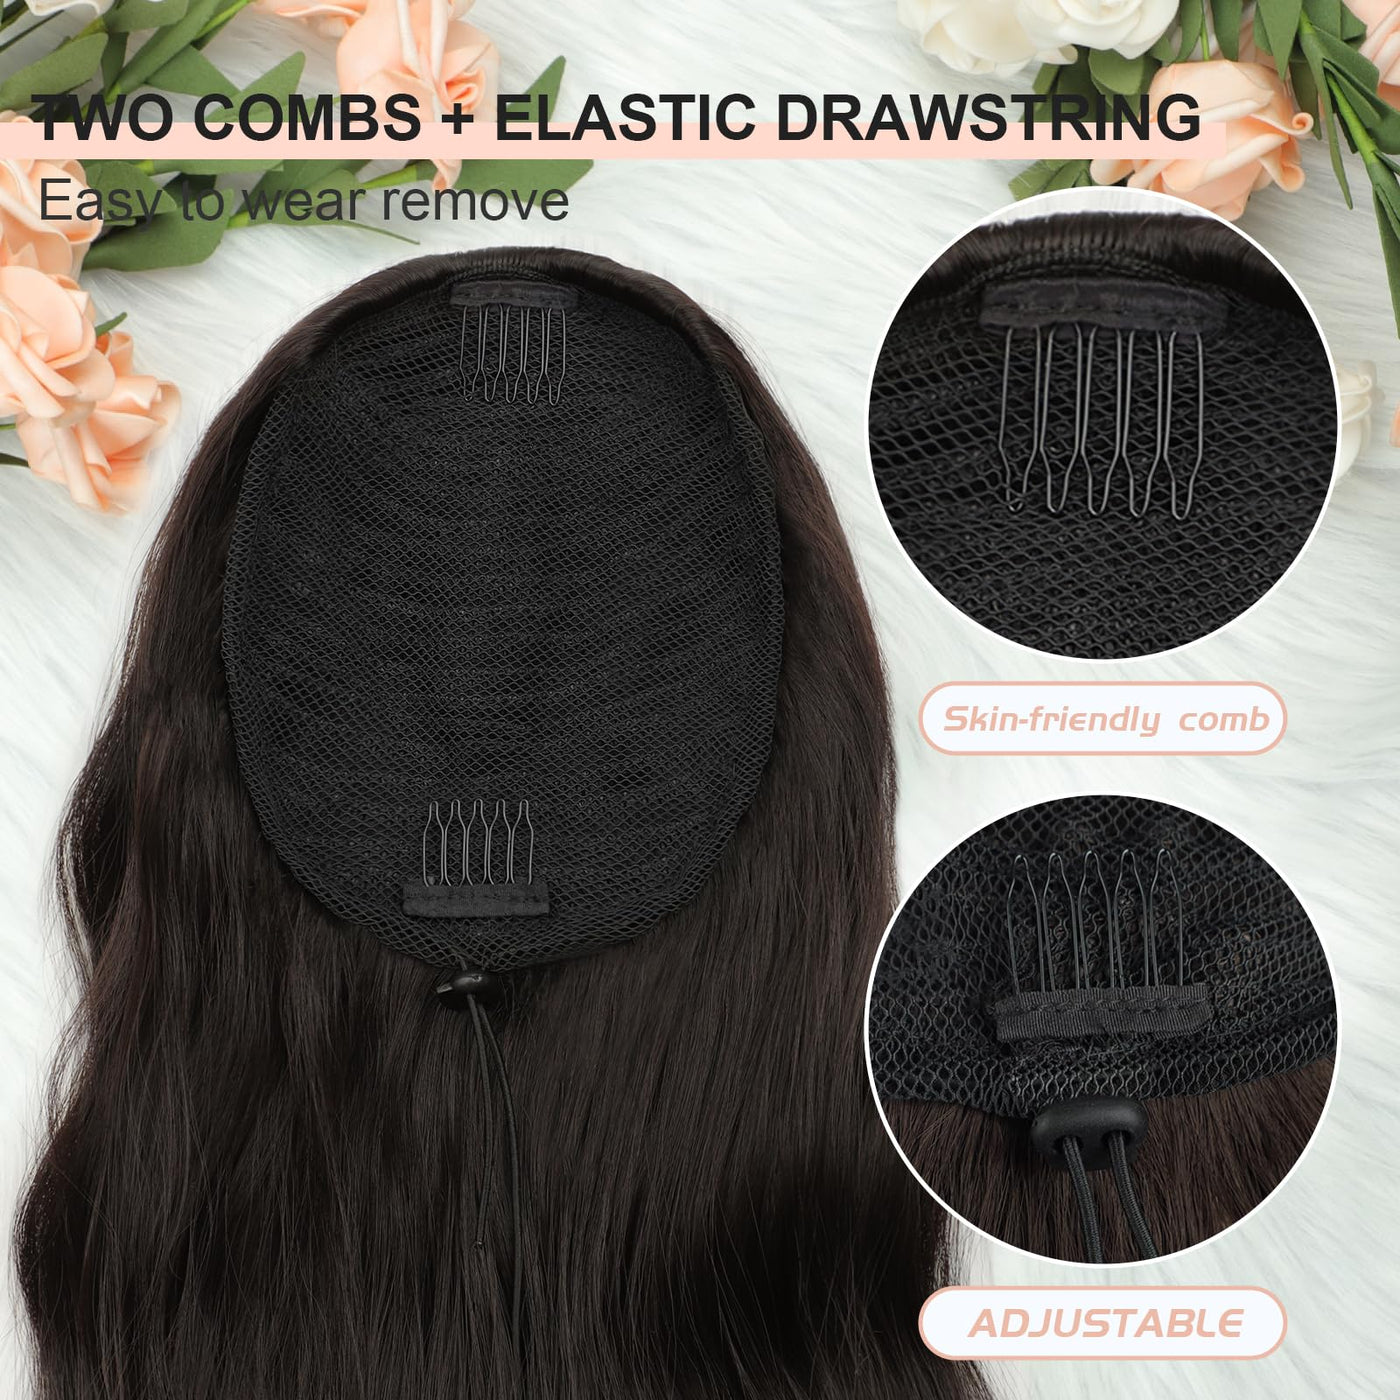 LKQee Ponytail Extension 26 Inch Long Wavy Drawstring Ponytail for Women Dark Brown Pony Tail Hair Extension Synthetic Hairpiece for Daily Use